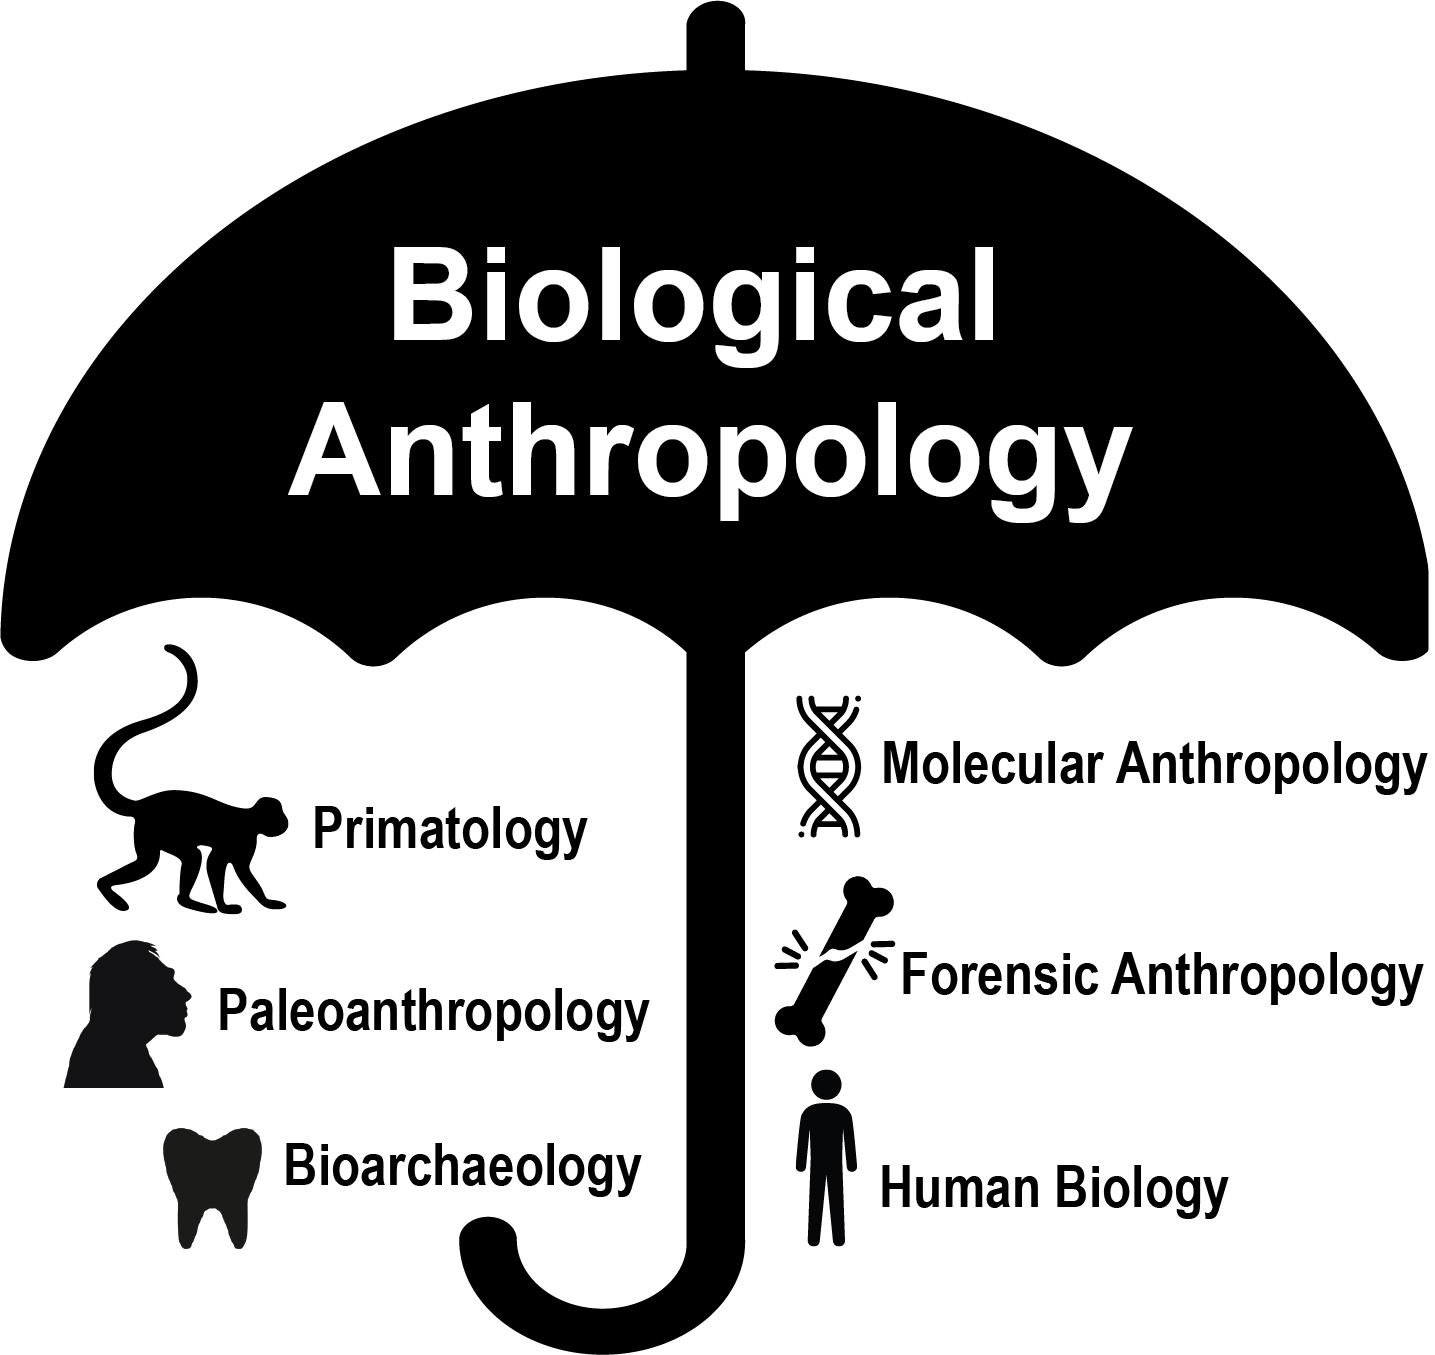 A “biological anthropology” umbrella hovers over subfield names accompanied by symbols.